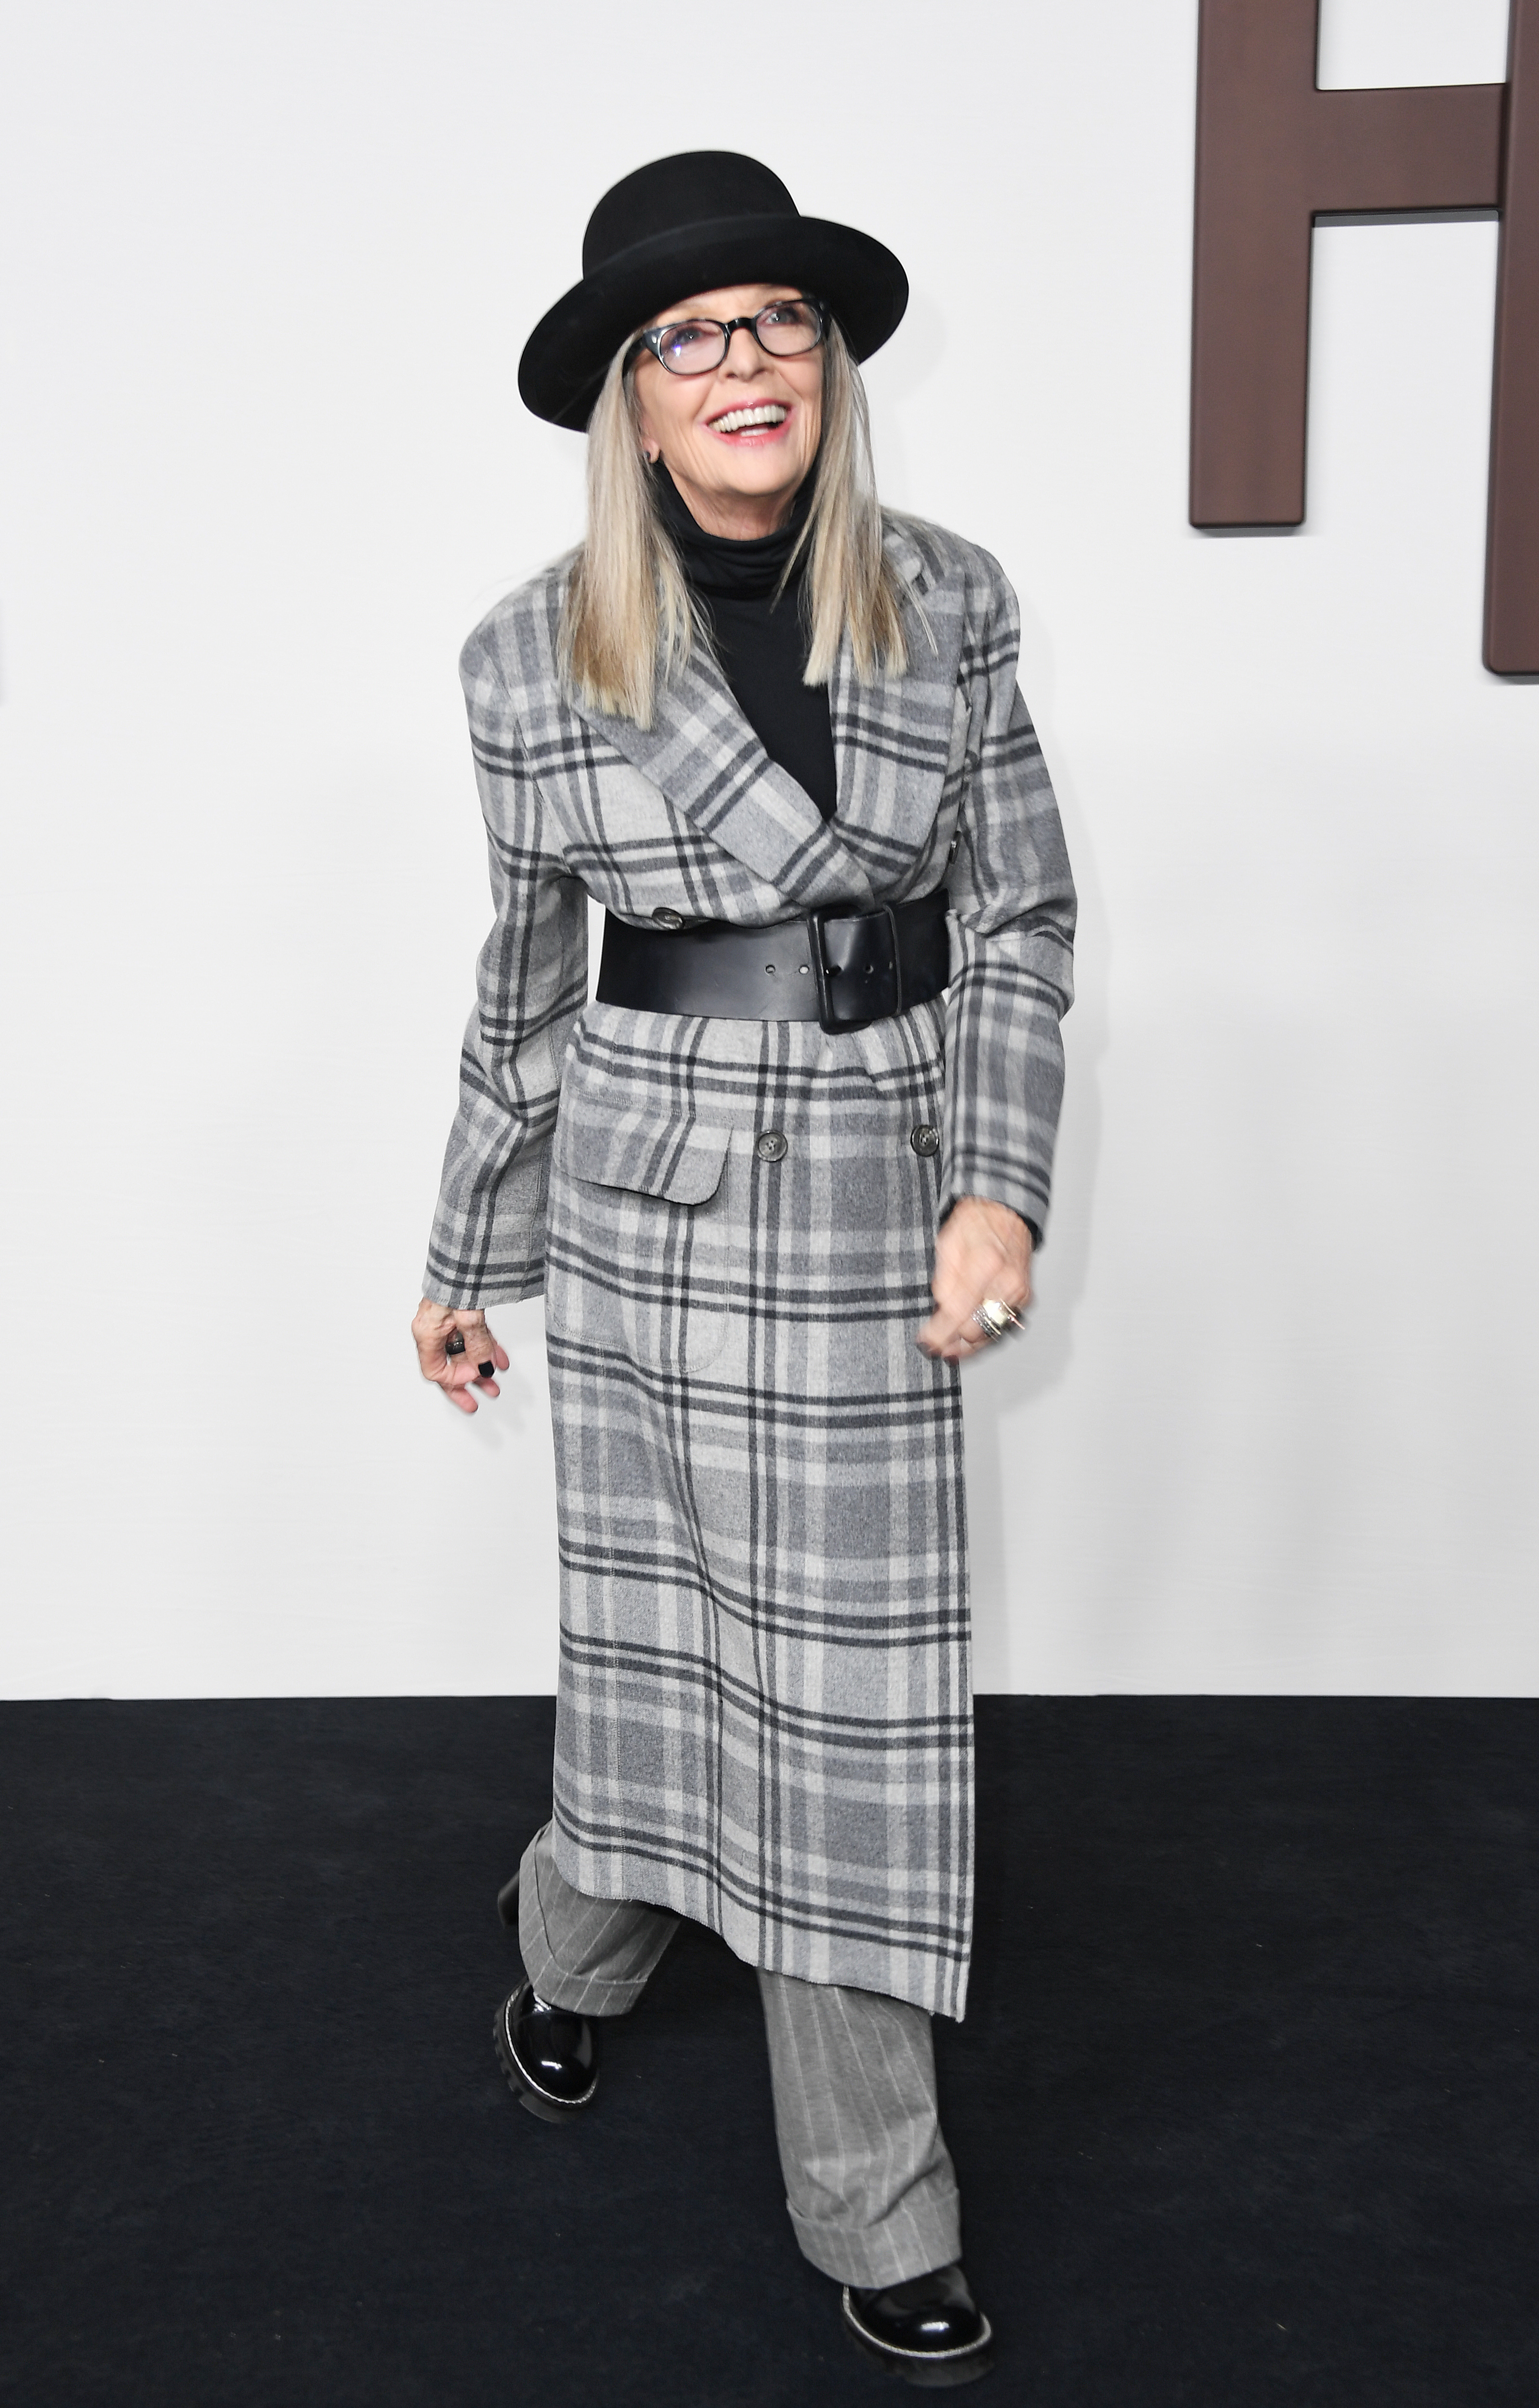 Diane Keaton in a plaid coat, turtleneck, and hat, poses with a smile at an event